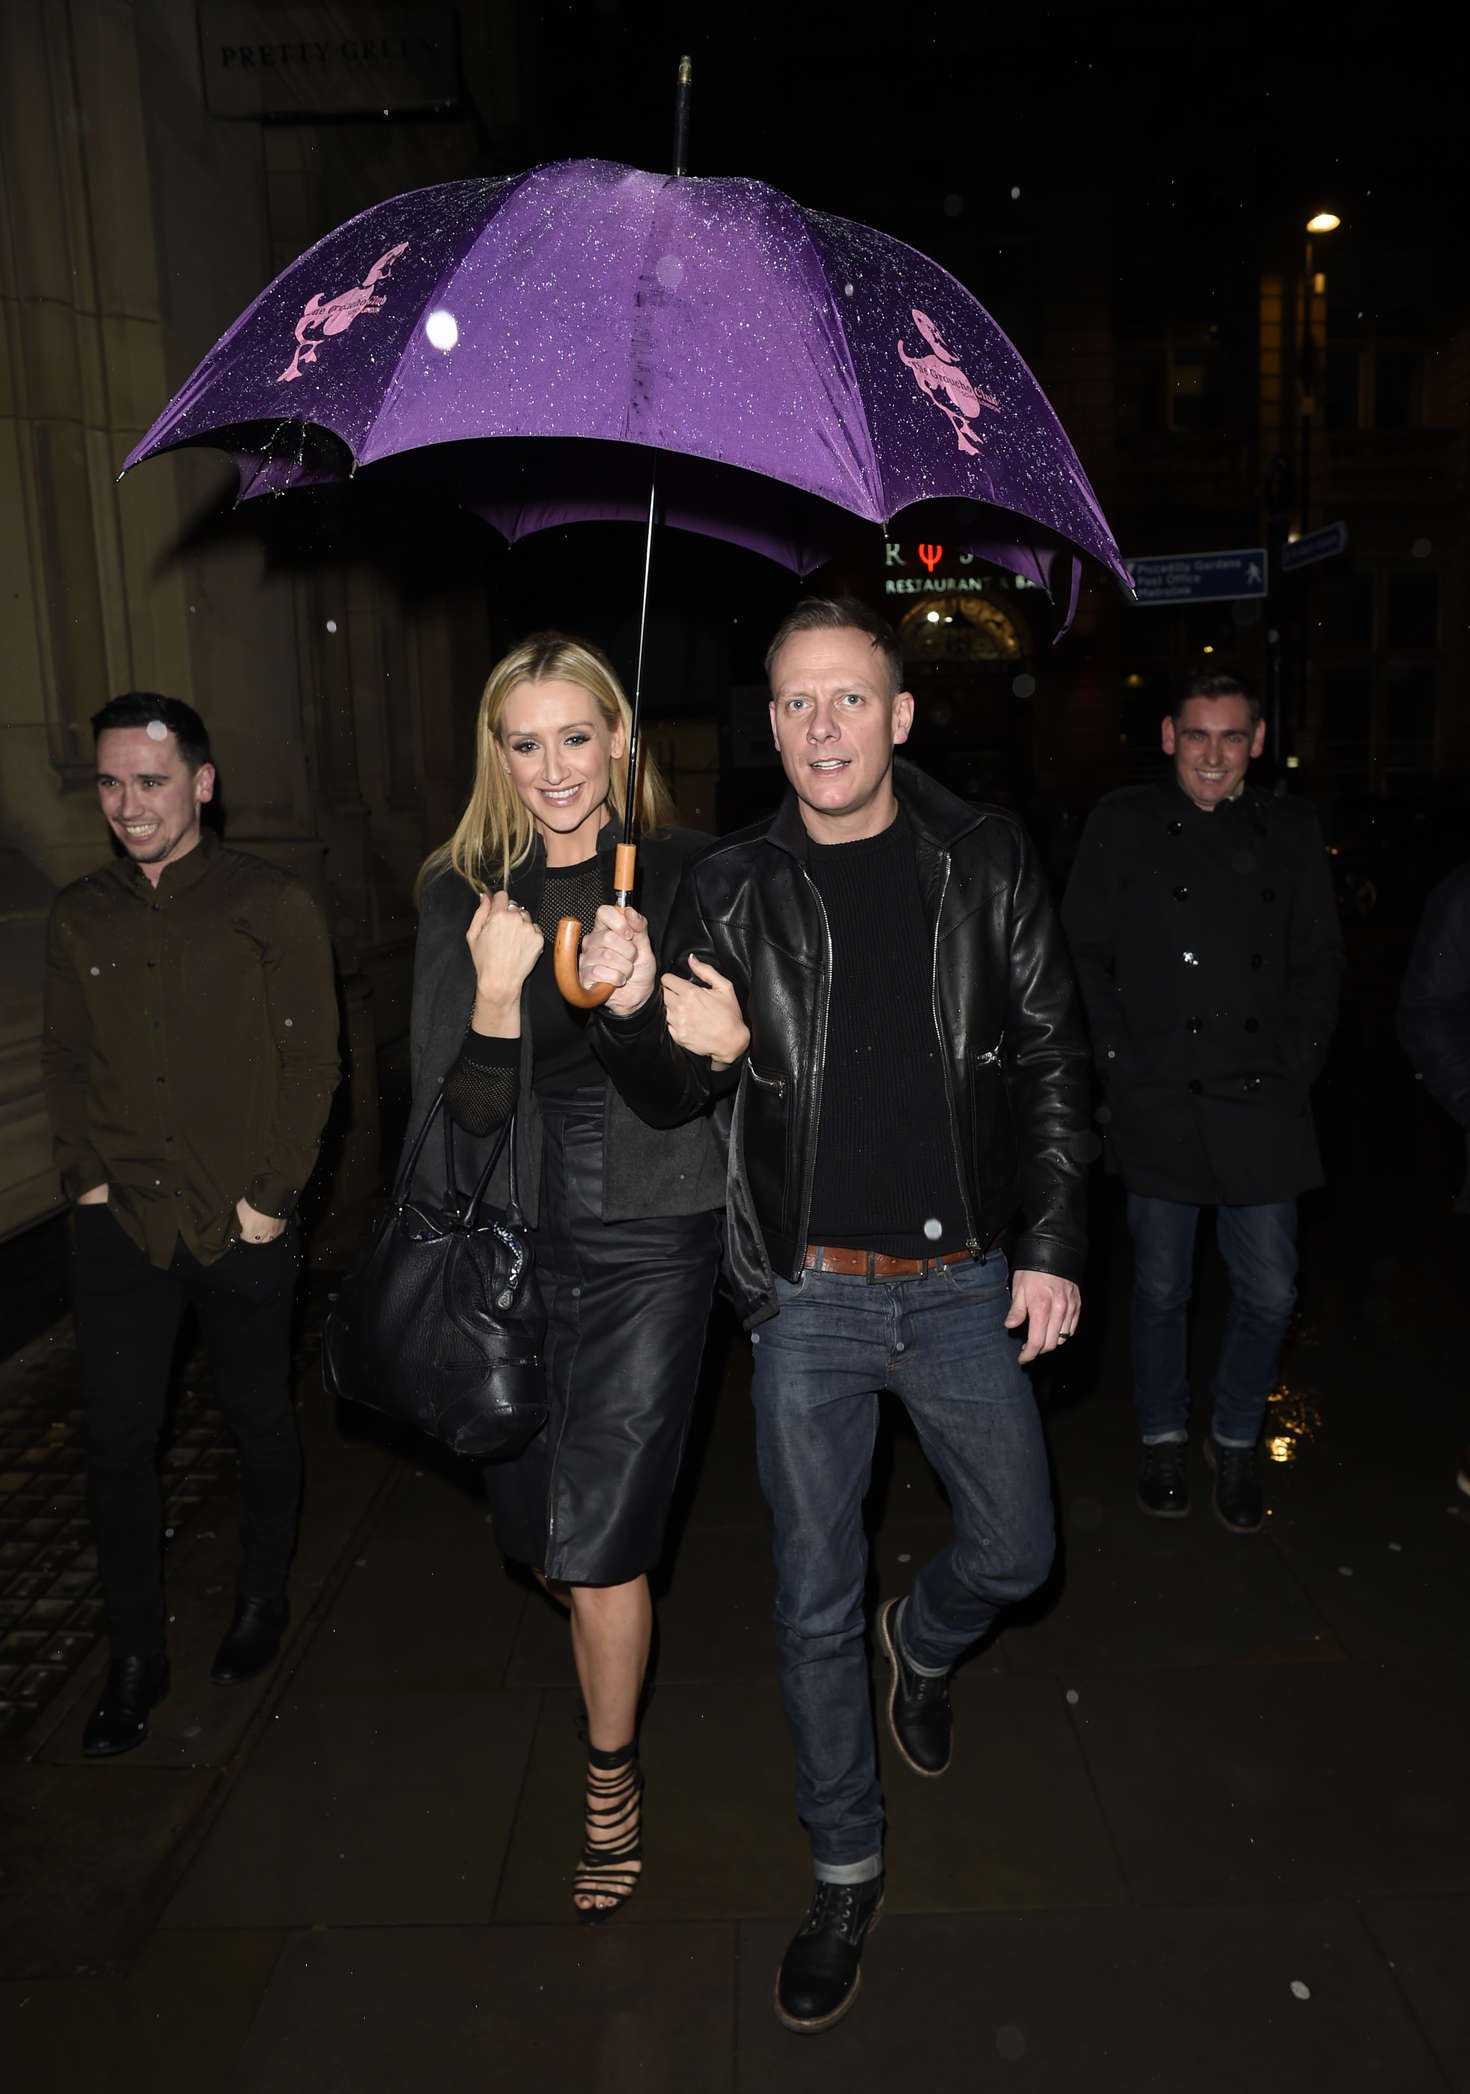 Catherine Tyldesley at Rosso Restaurant